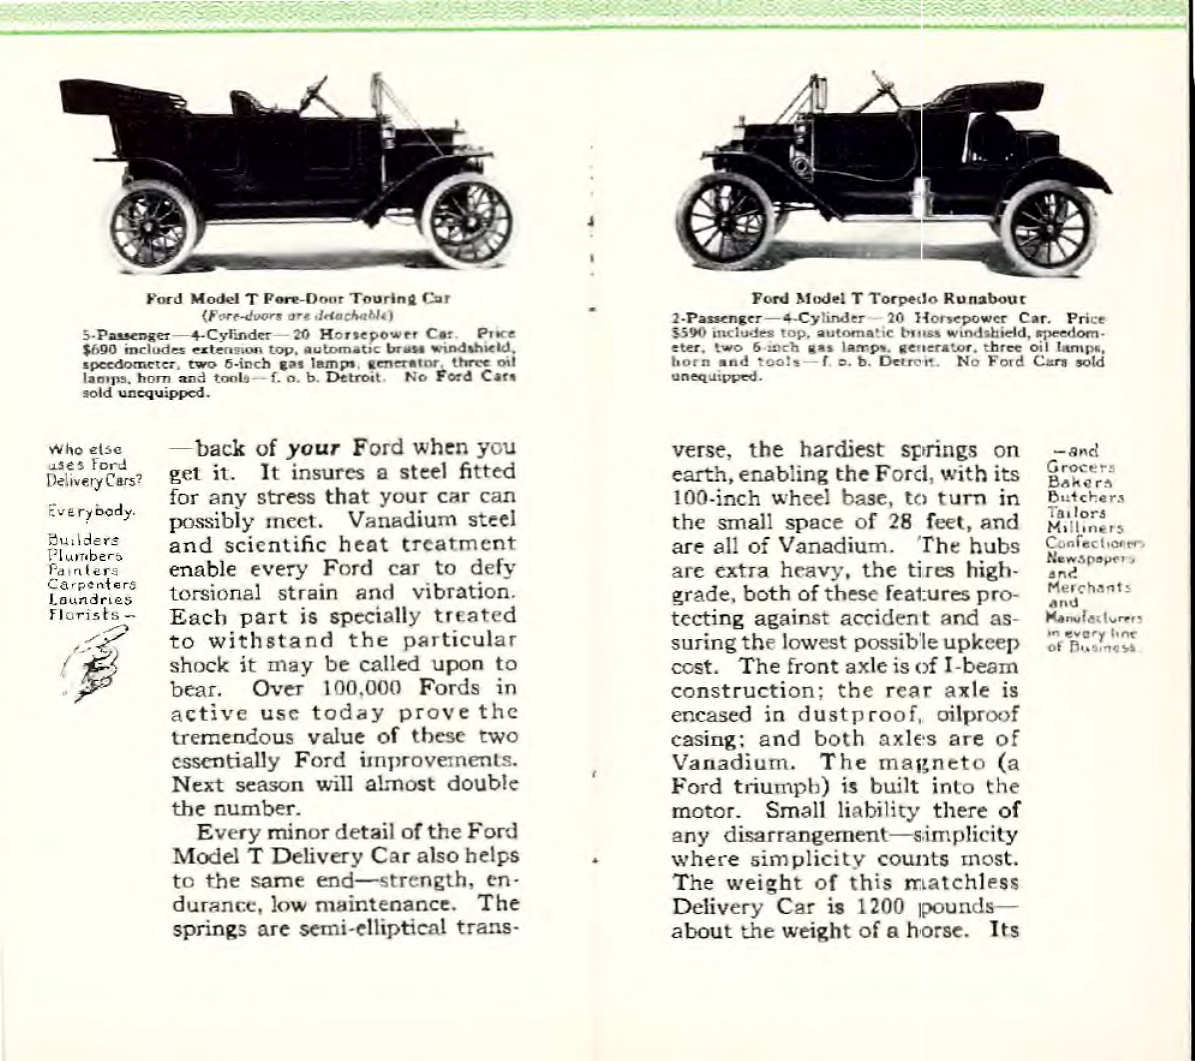 1912_Ford_Delivery_Car-20-21